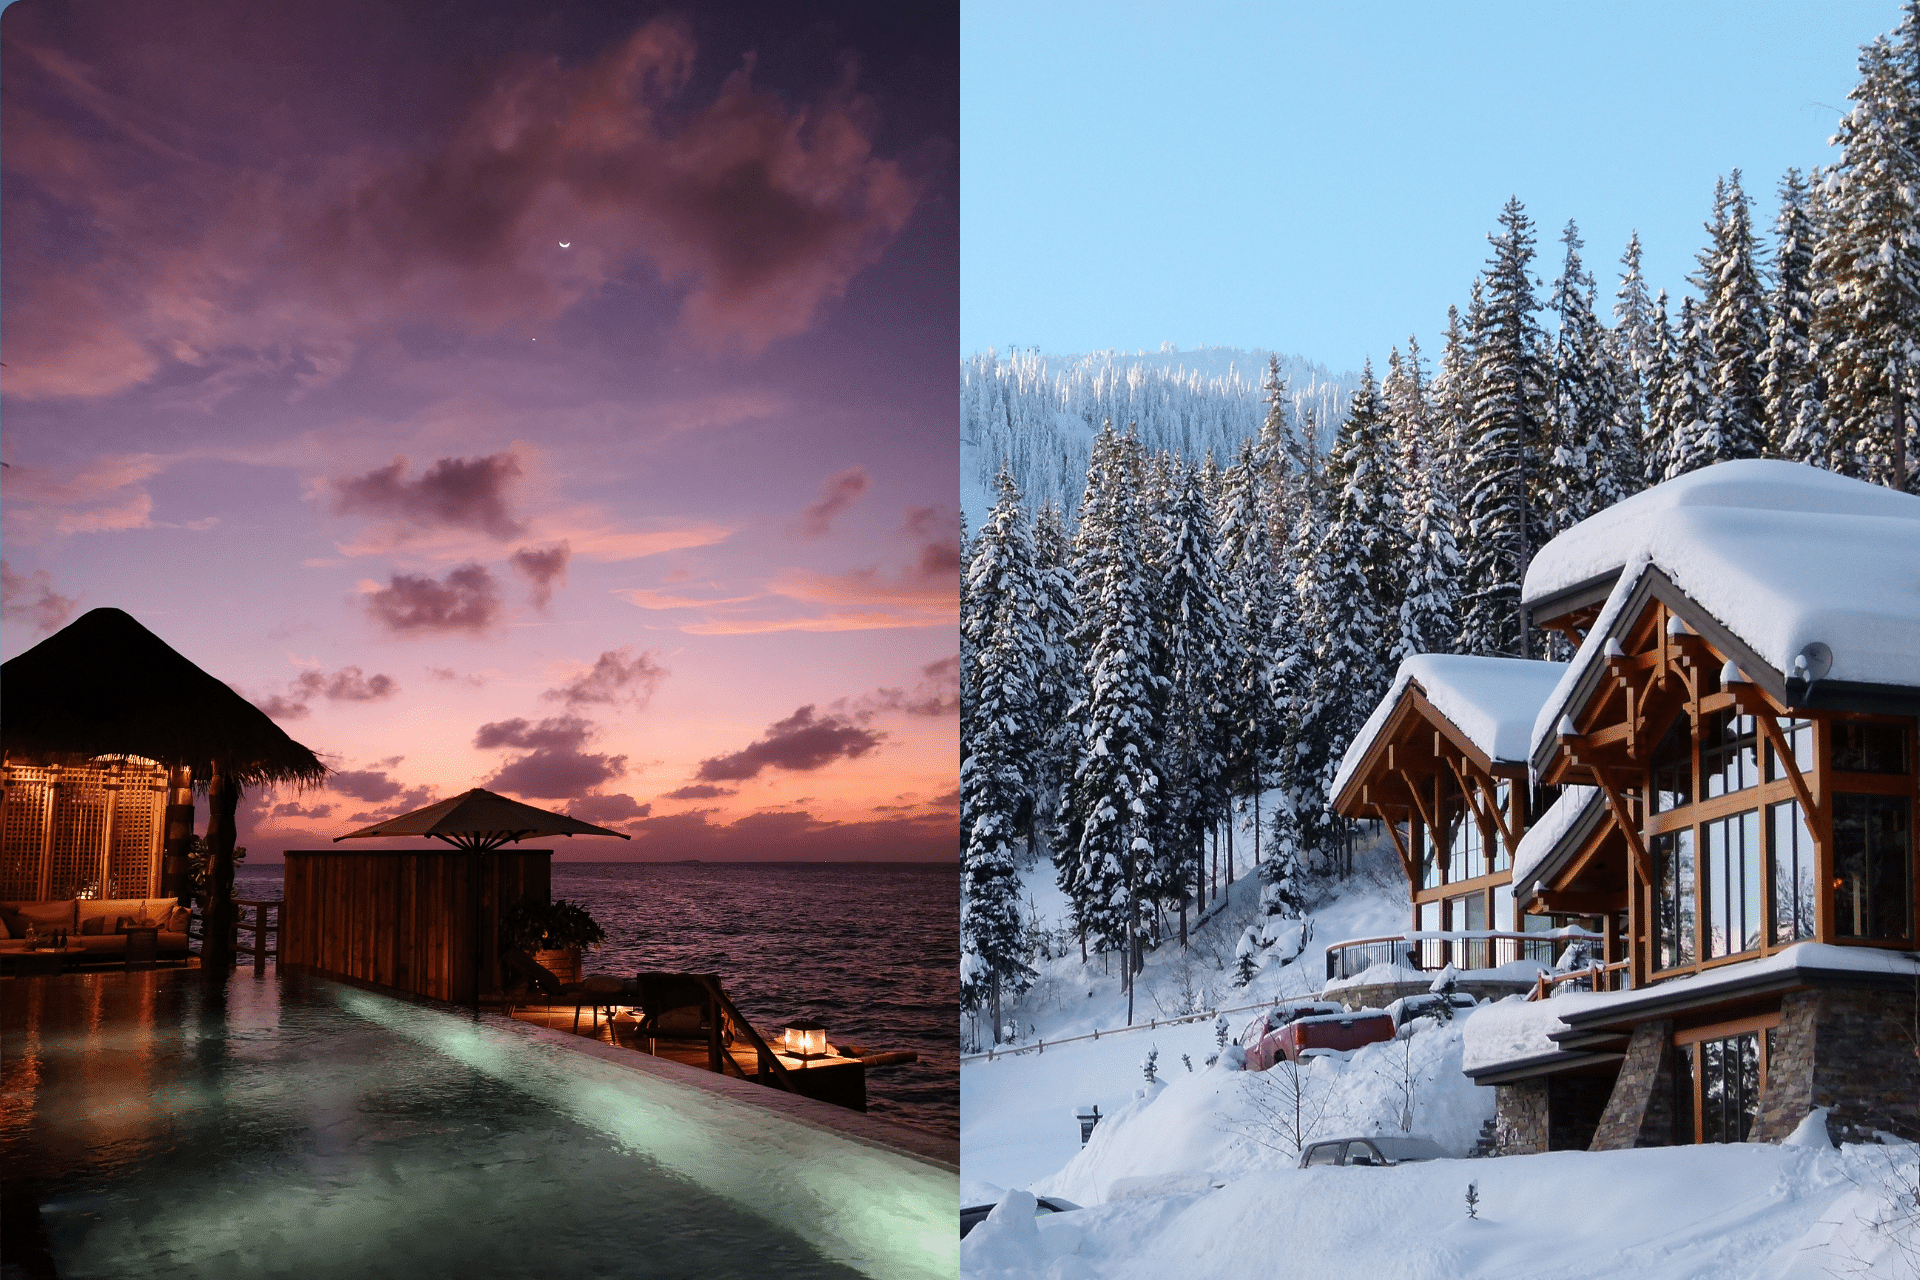 A Hut on a Resort by the Beach at Dusk by Pexels and Houses covered by snow